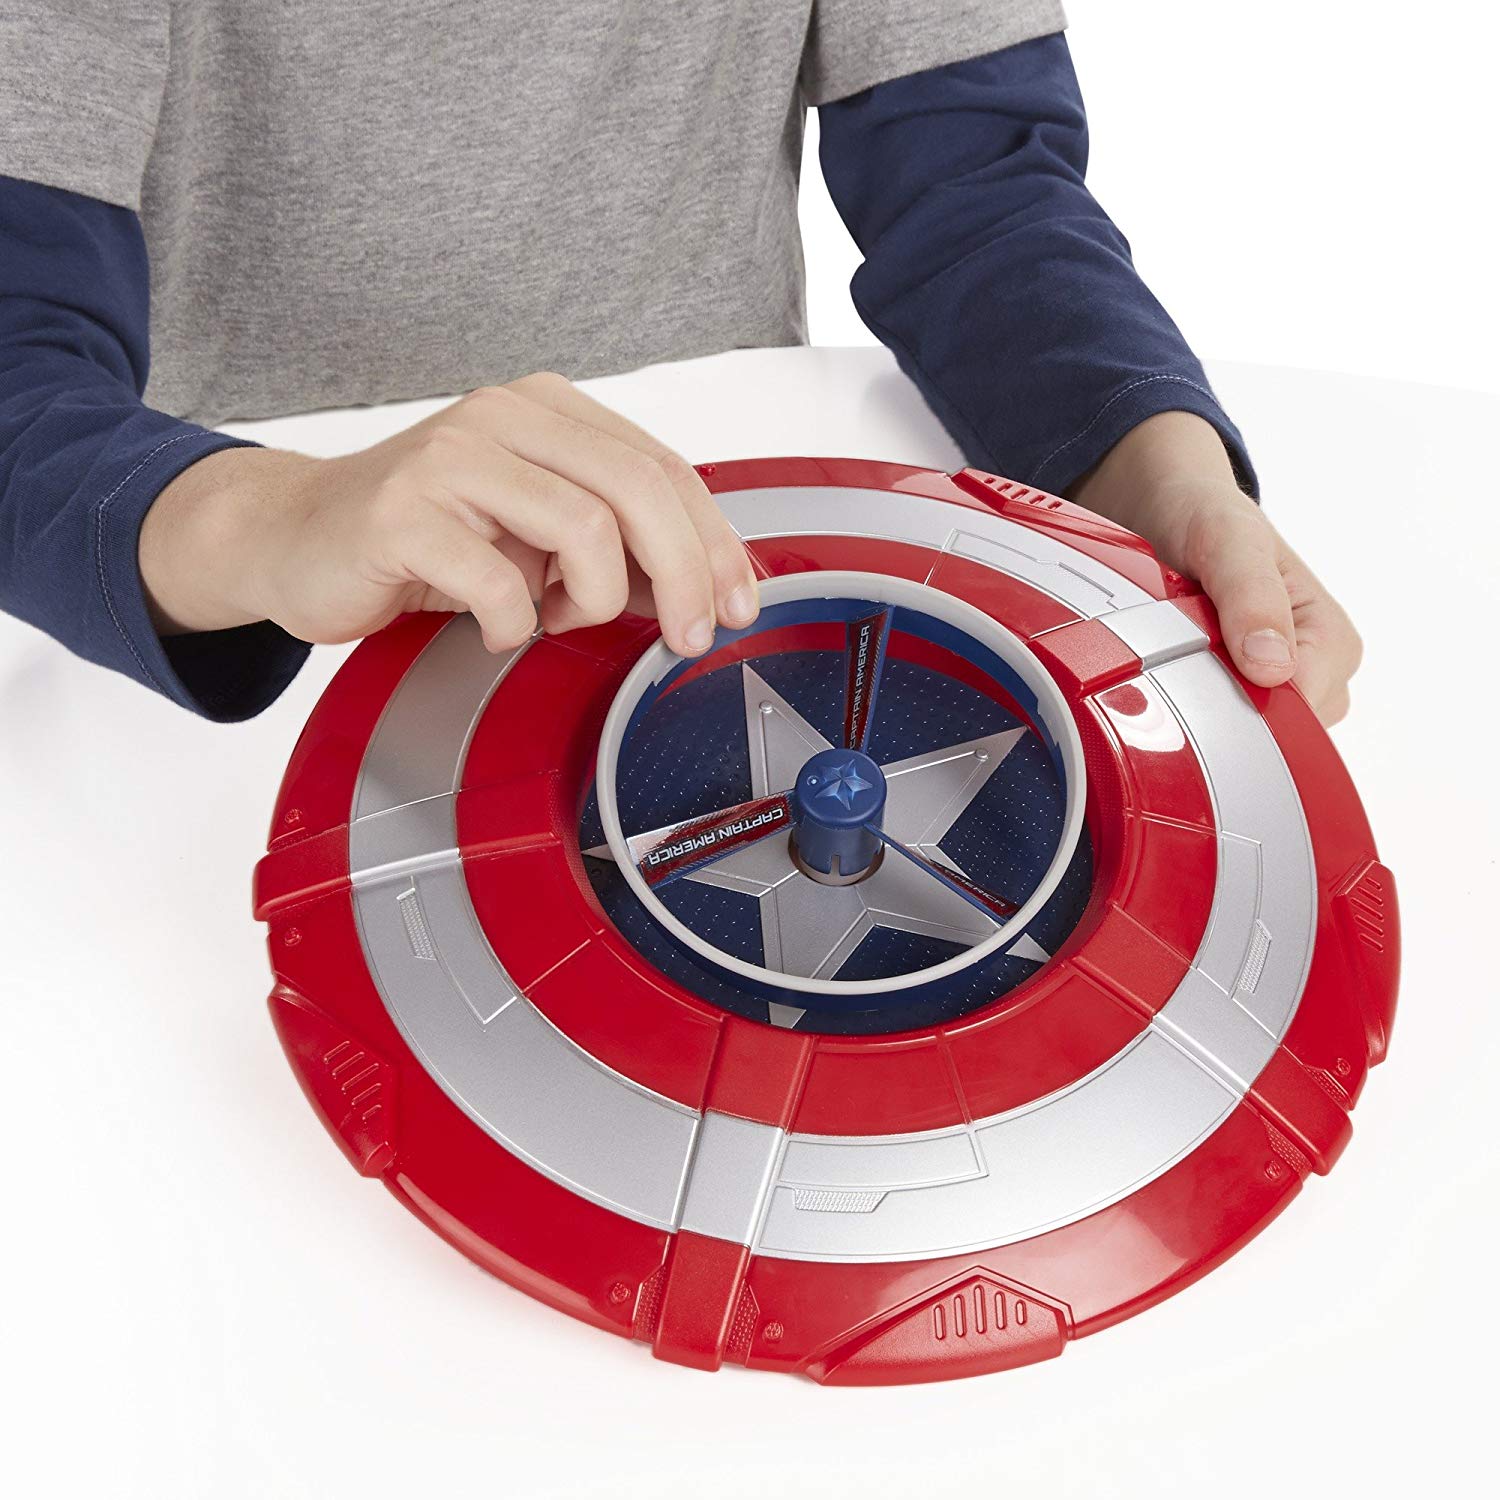 MARVEL AVENGERS AGE OF ULTRON CAPTAIN AMERICA STAR LAUNCH SHIELD B0427 NEW 